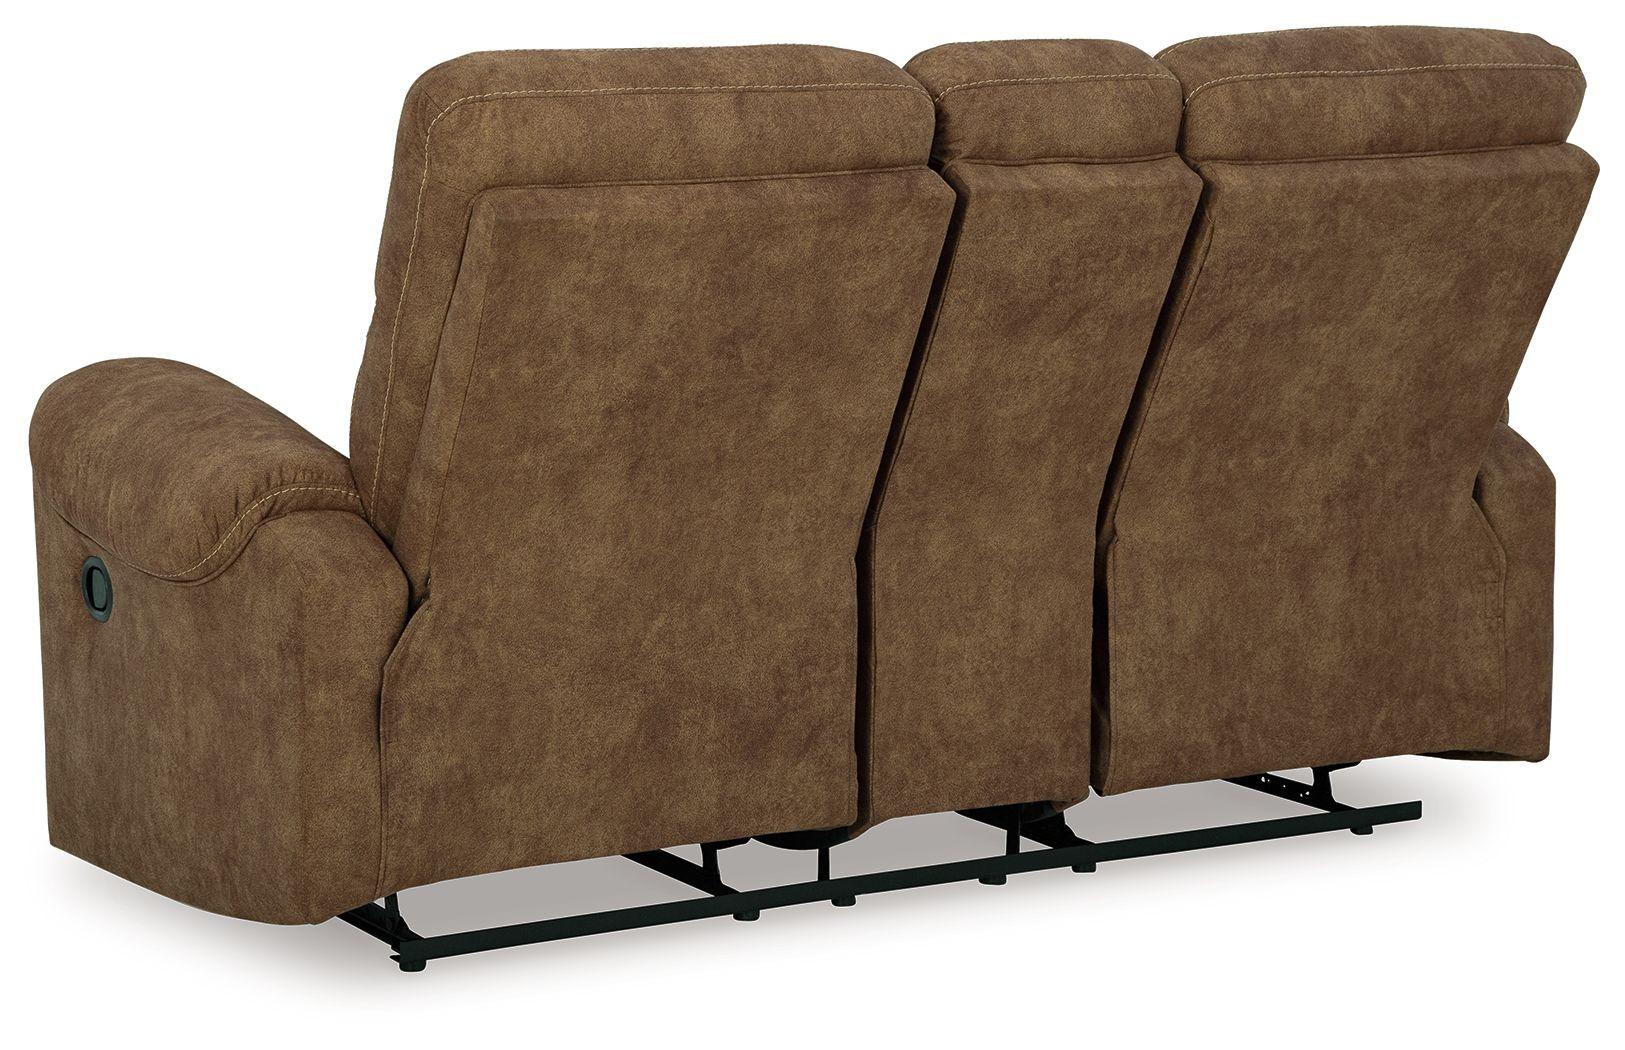 Signature Design by Ashley® - Edenwold - Brindle - Dbl Reclining Loveseat With Console - 5th Avenue Furniture